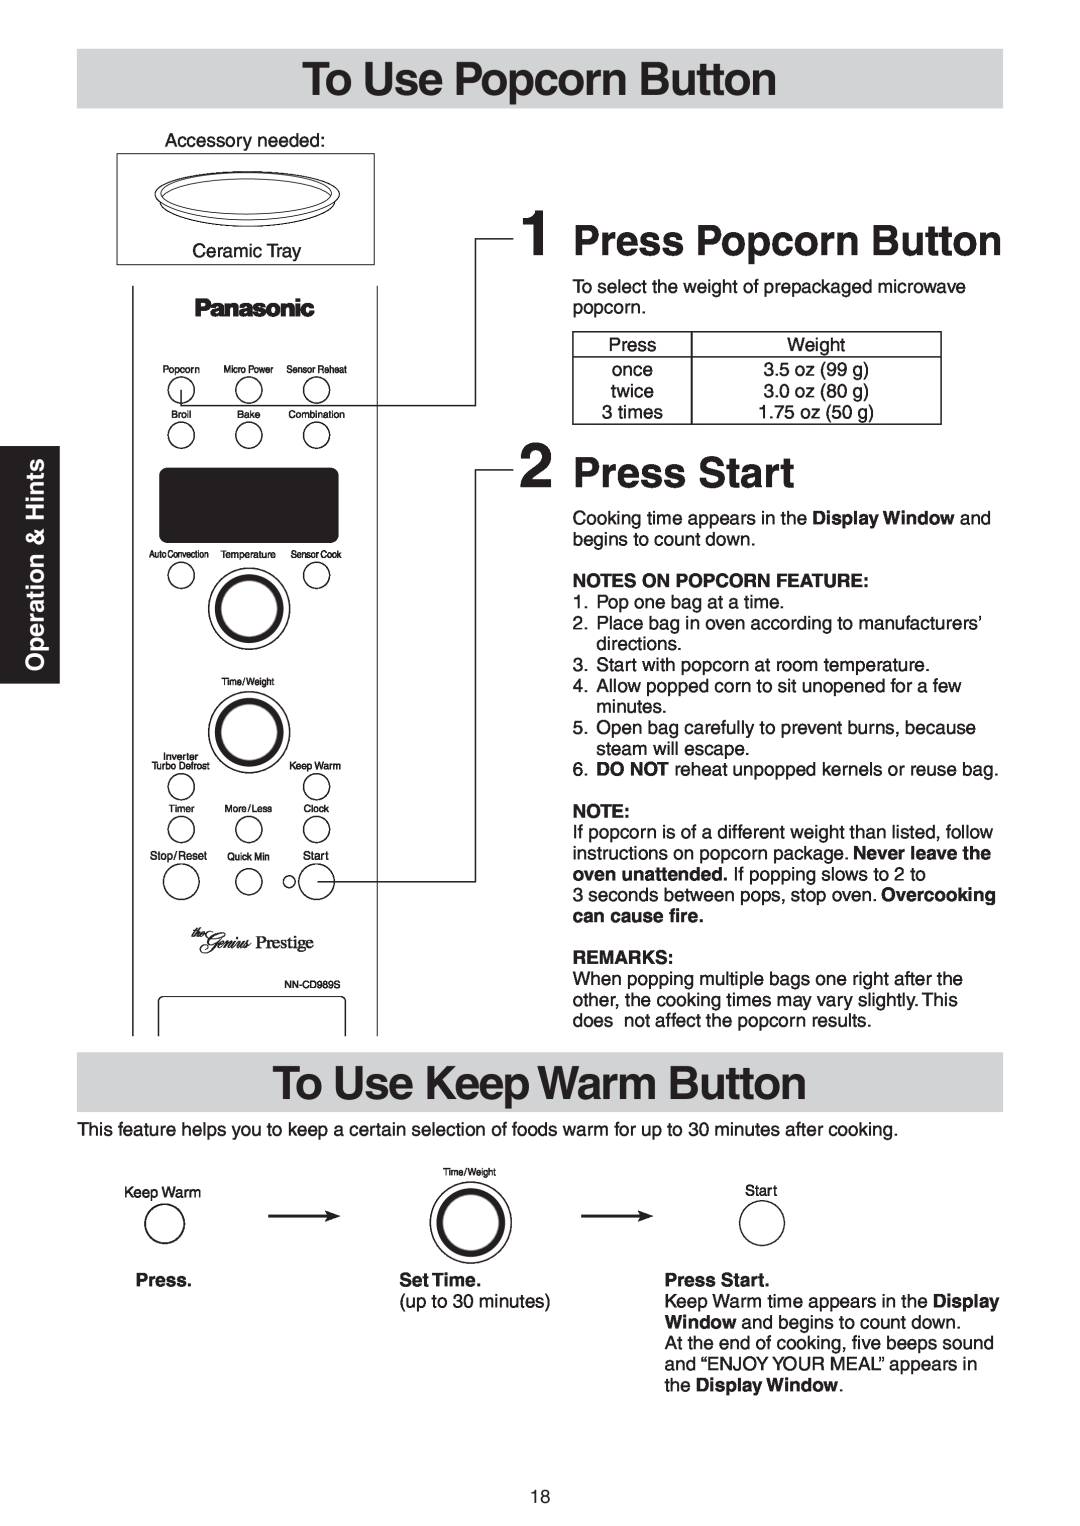 Panasonic NN-CD989S To Use Popcorn Button, To Use Keep Warm Button, Press Popcorn Button, Press Start, Operation & Hints 